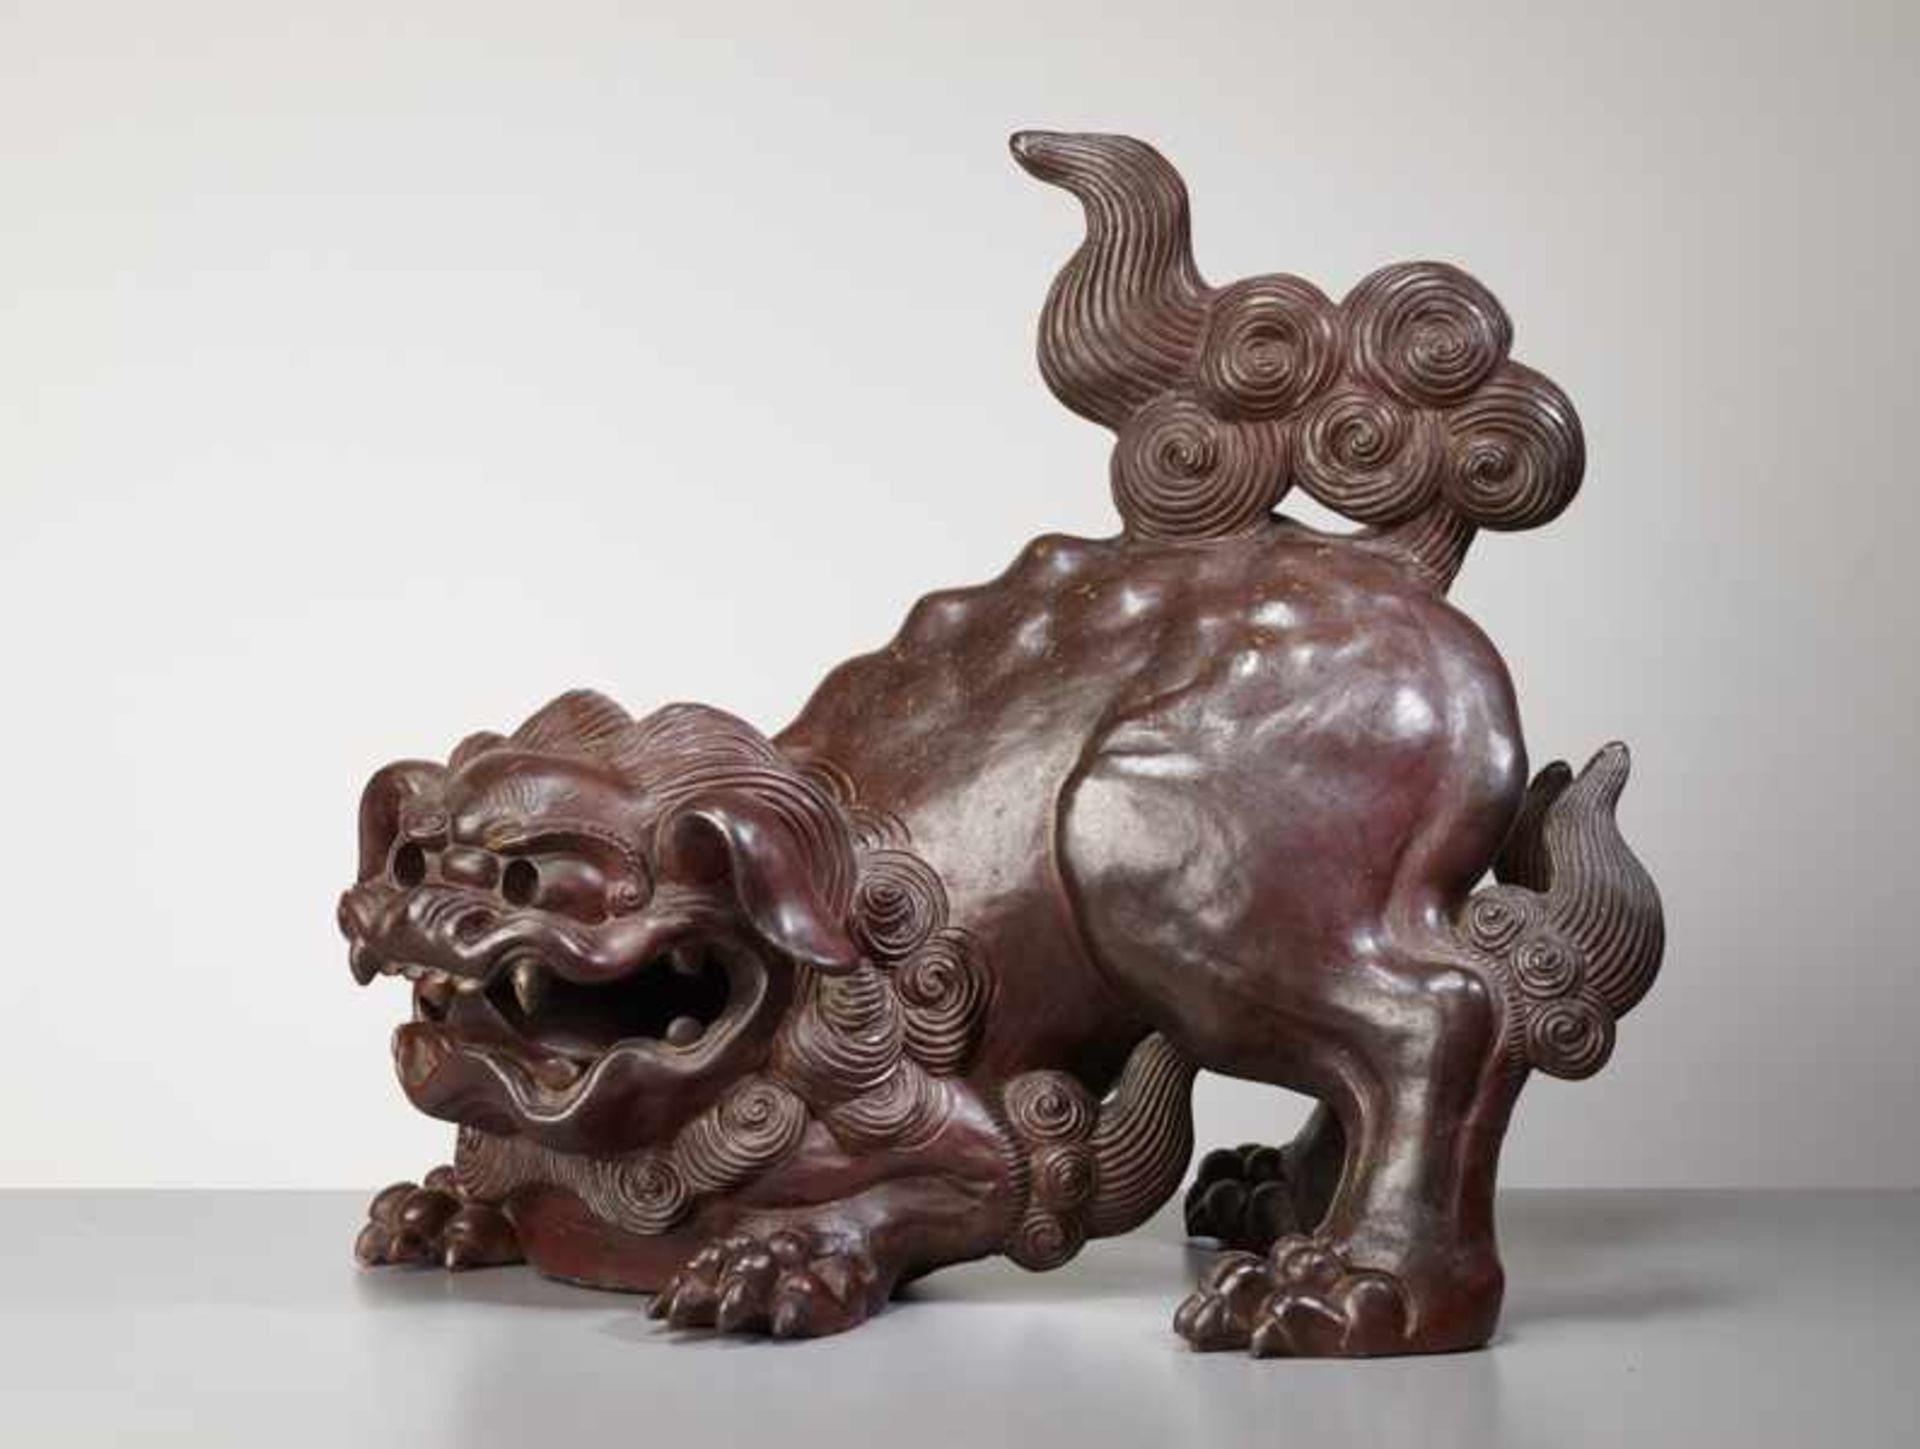 SCULPTURE OF A HISSING SHISHI Fired ceramic. Japan, Meiji periodExceptional and massive sculpture of - Image 2 of 7